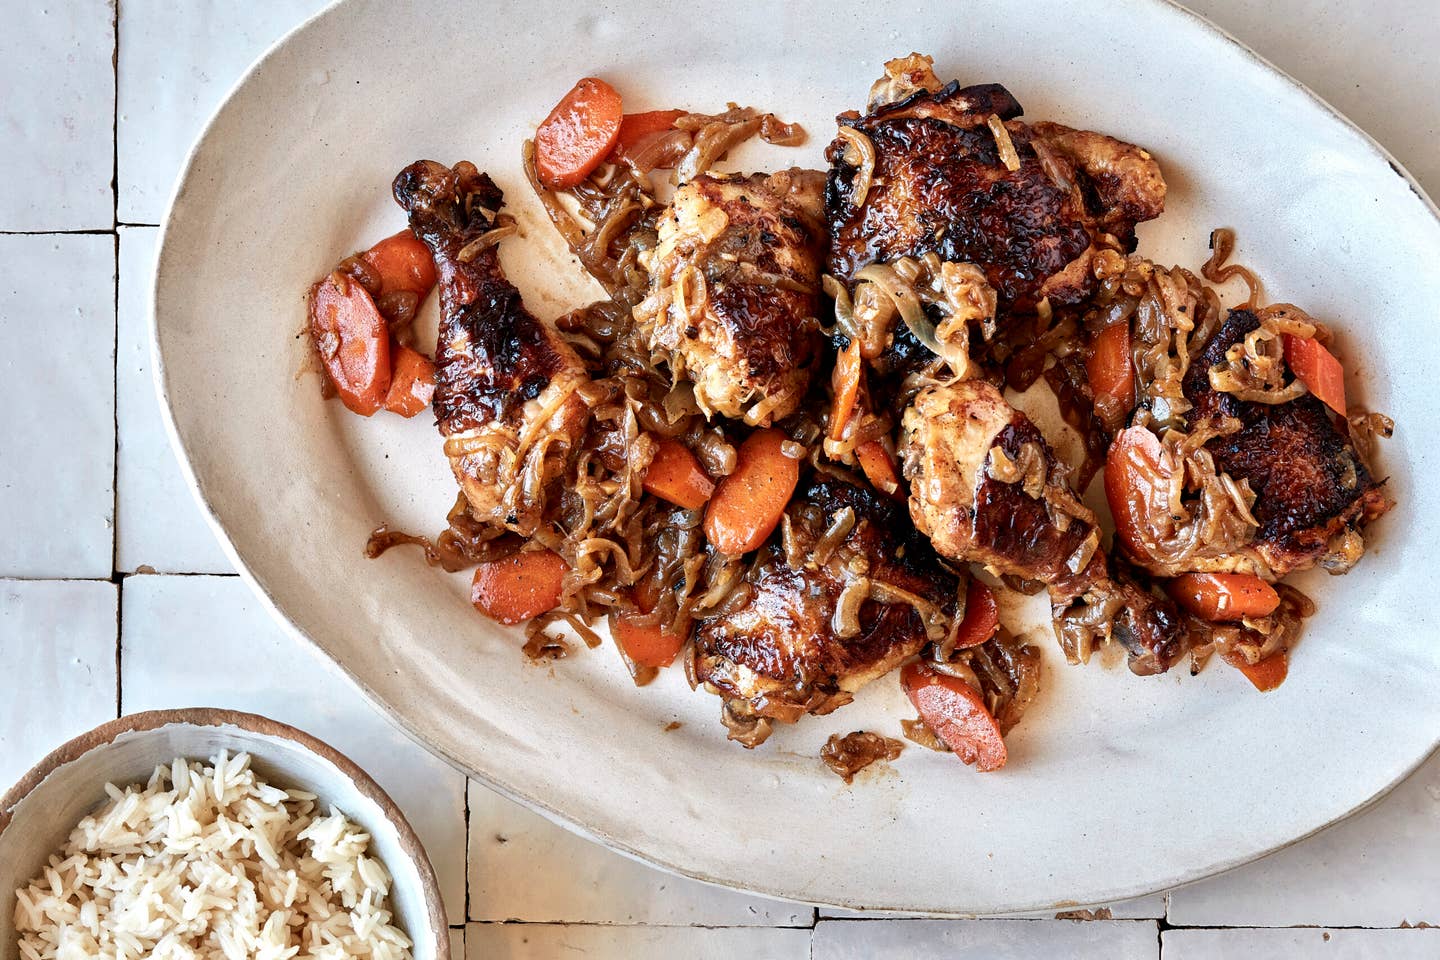 Senegalese style grilled chicken recipe with caramelized onions